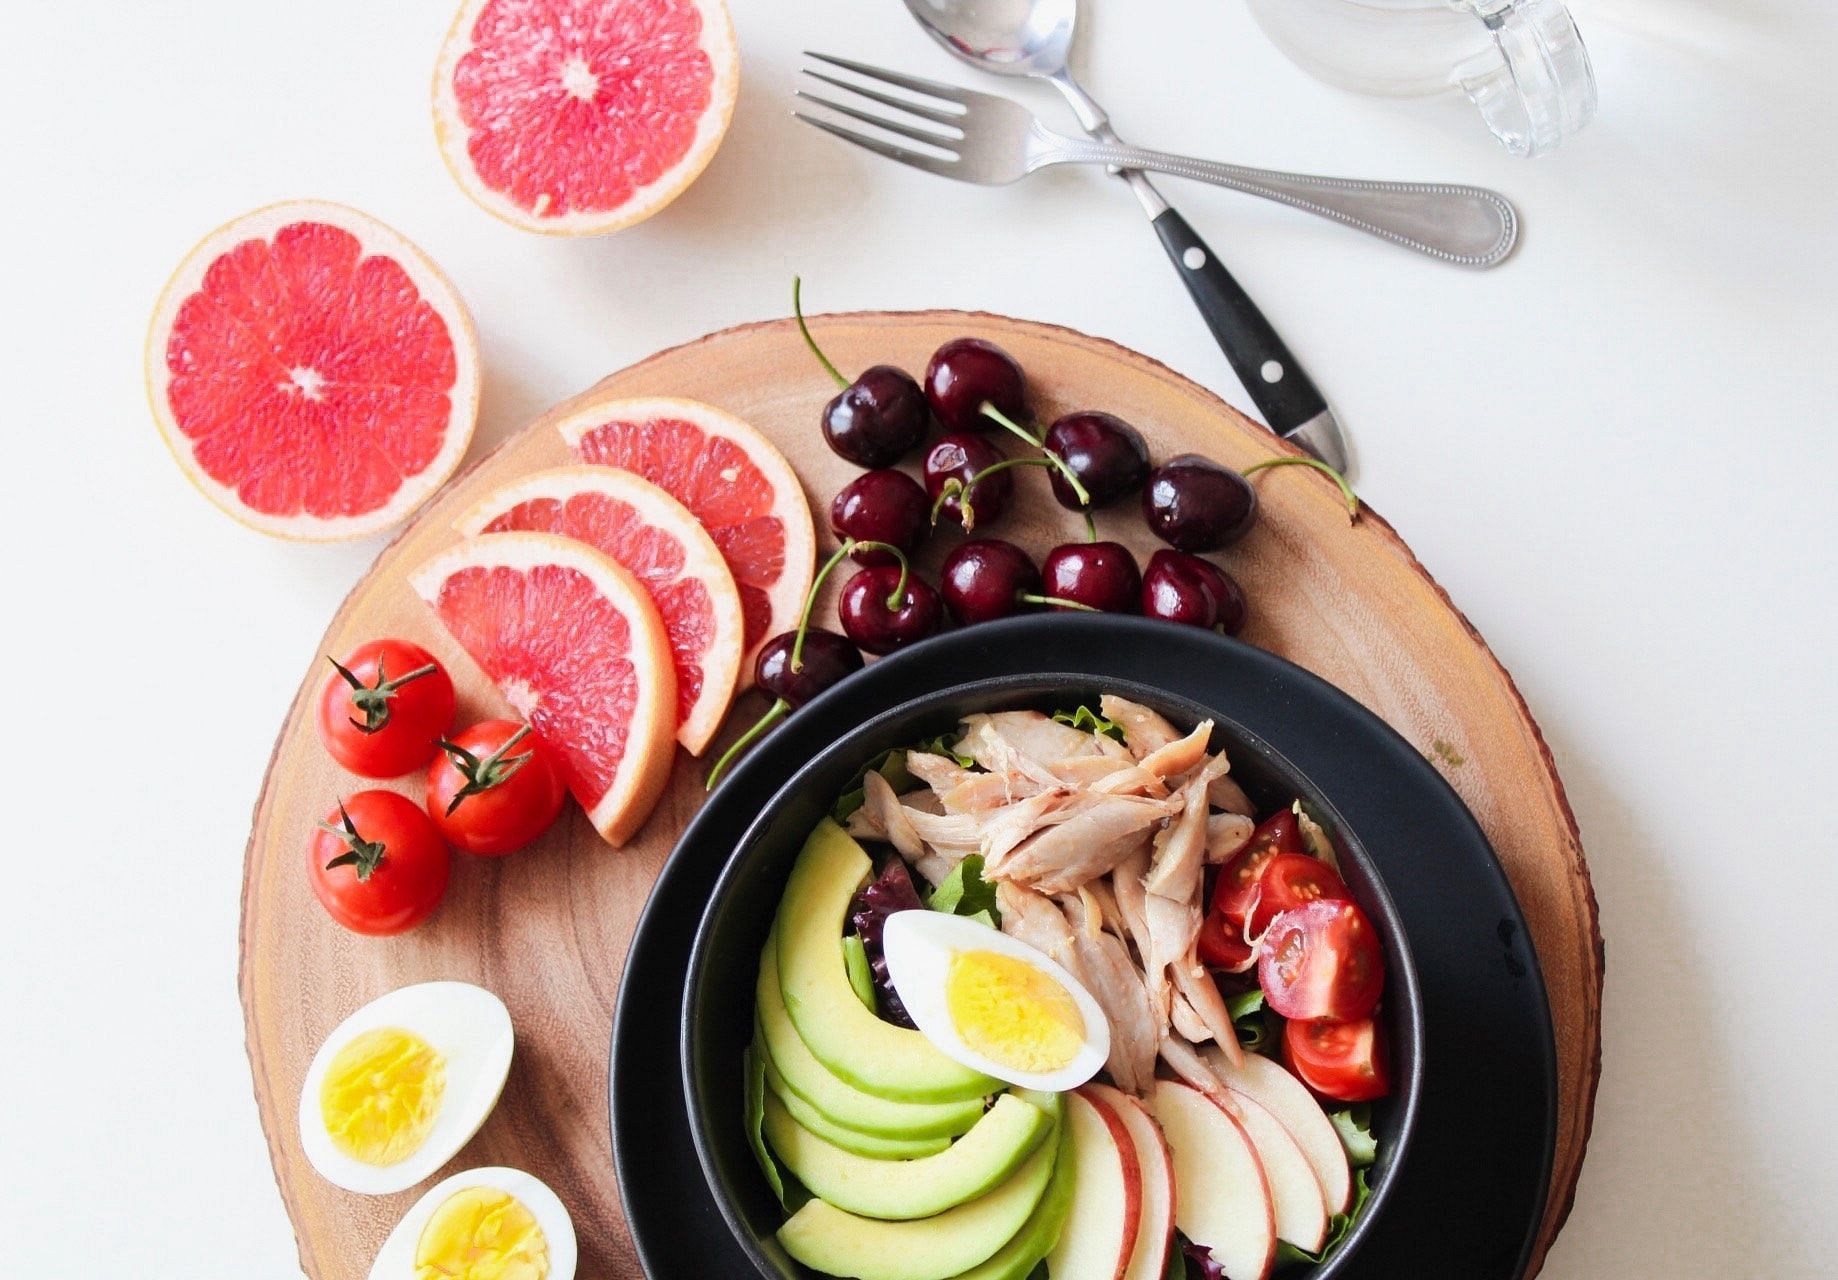 Healthy diet is also beneficial for diabetes pain (Image via Pexels/Jane Doan)